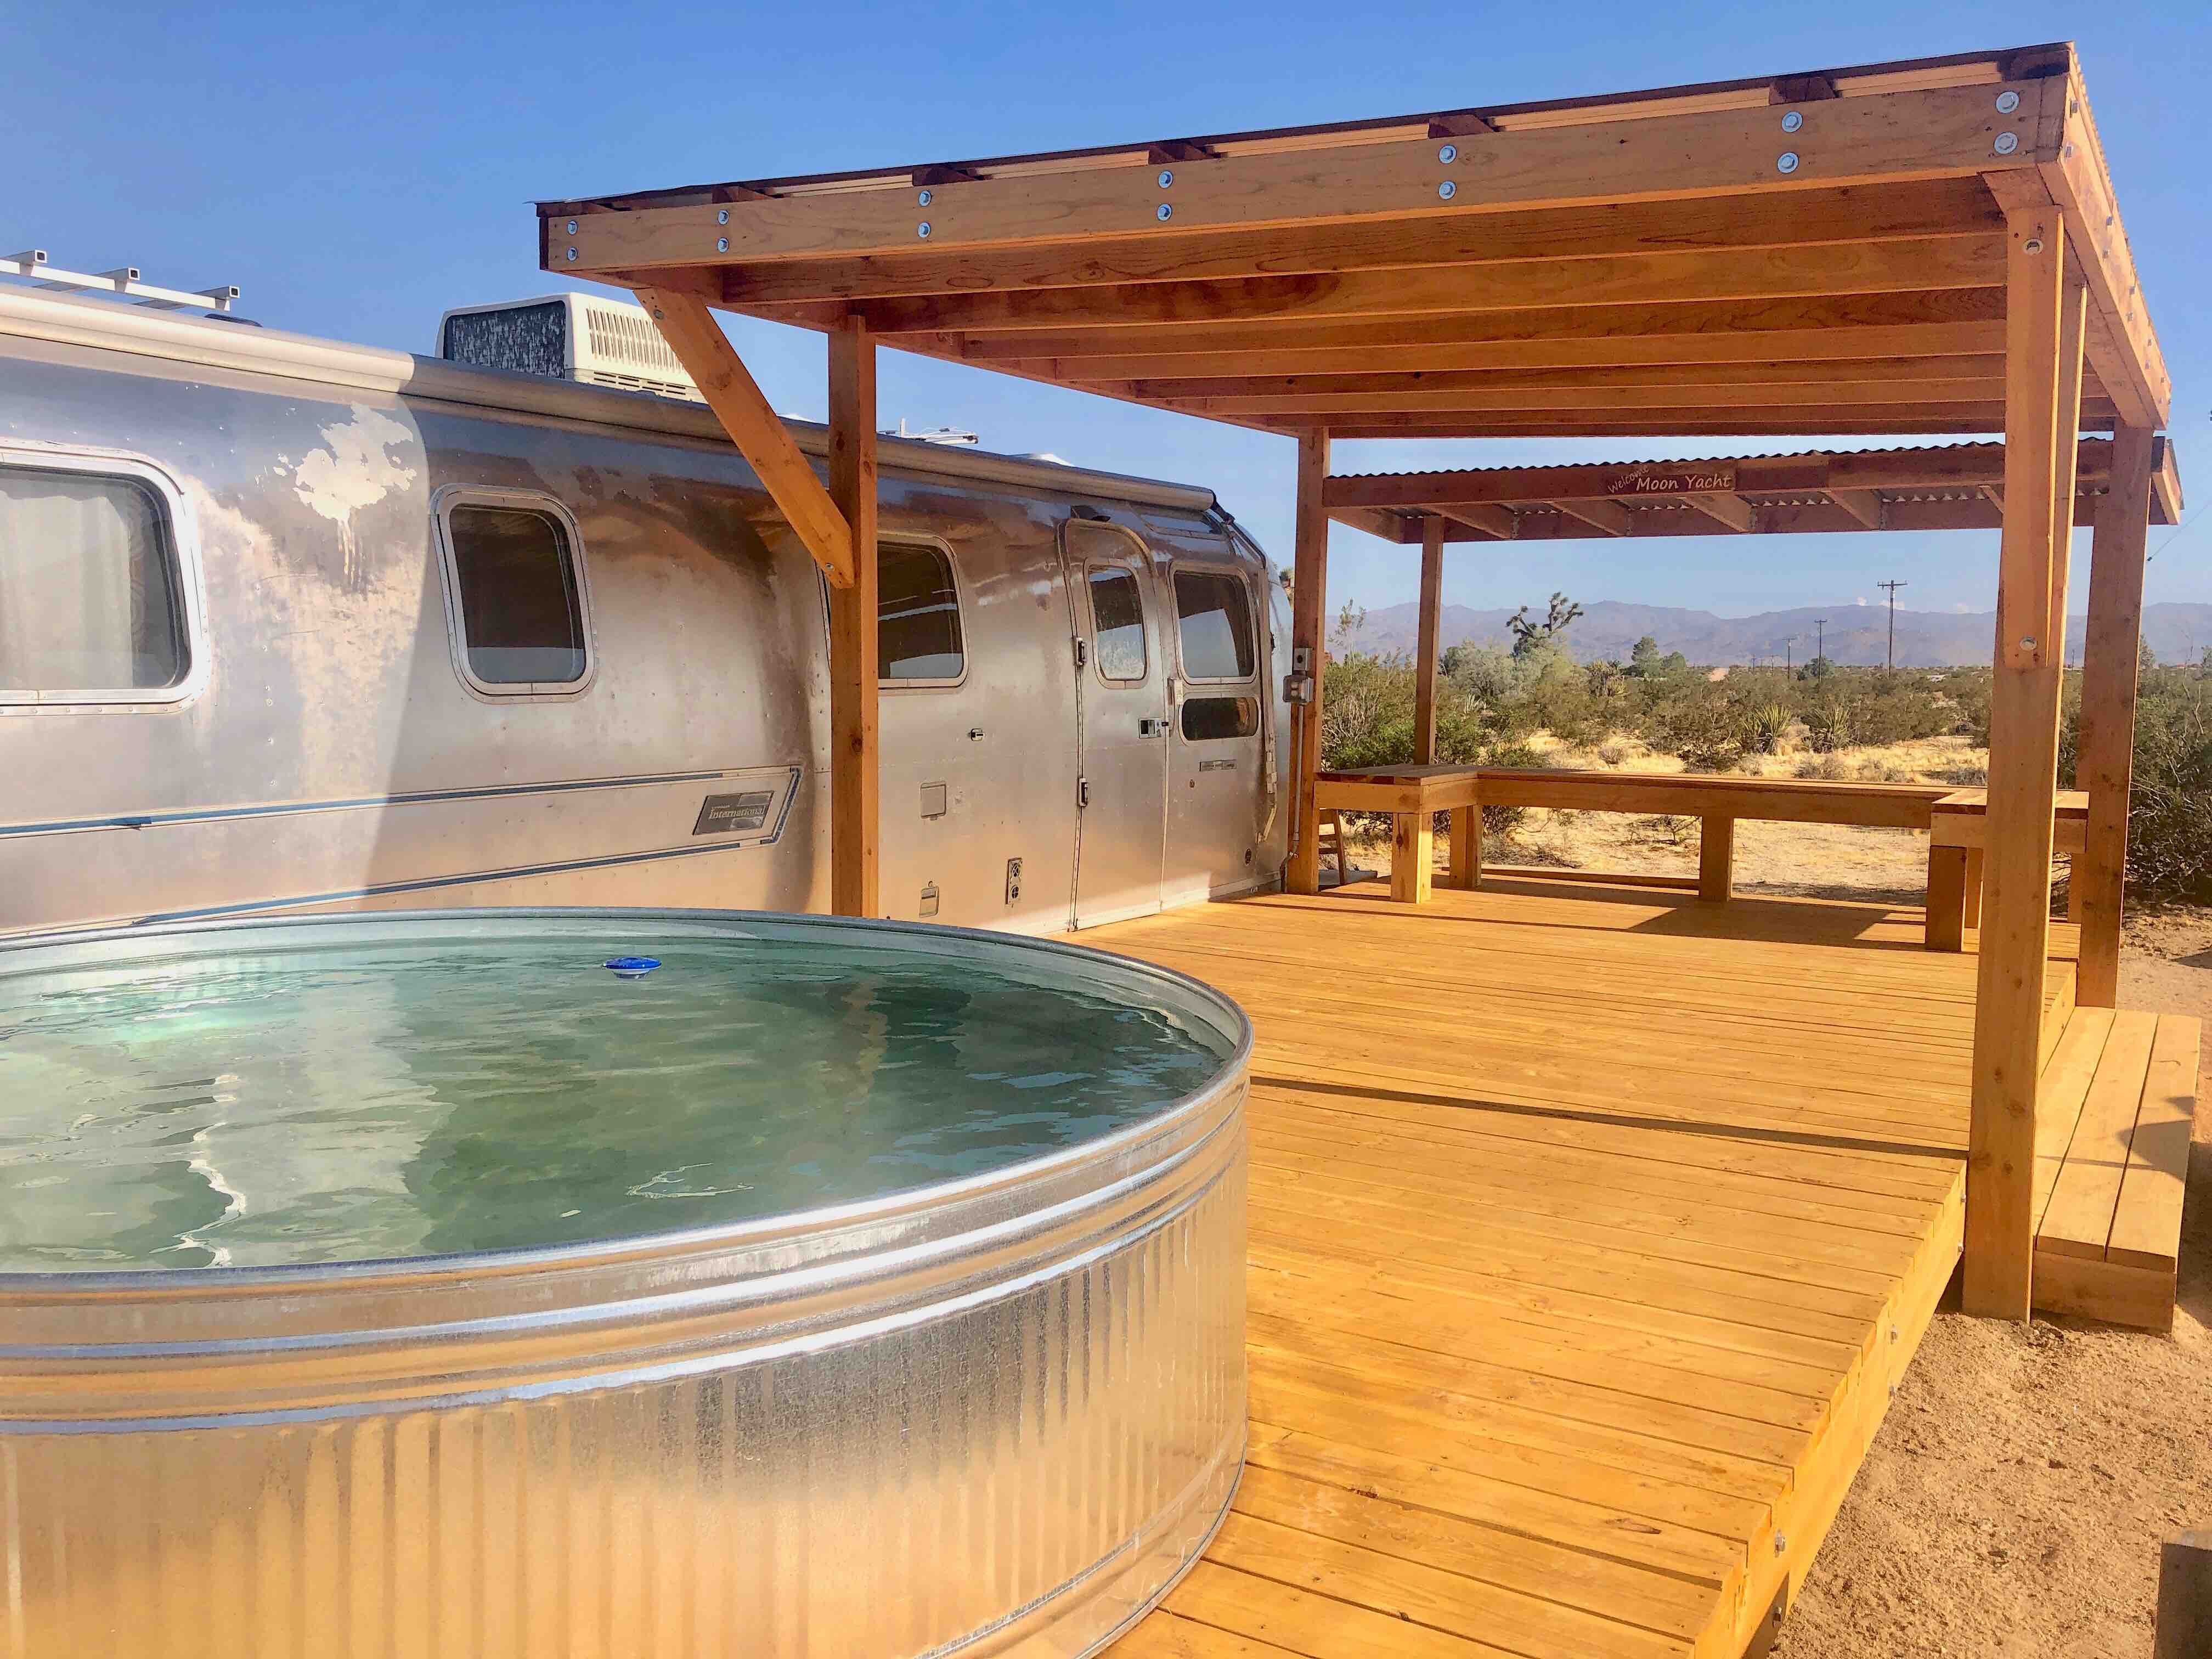 The Moon Yacht Campers/RVs for Rent in Joshua Tree, California